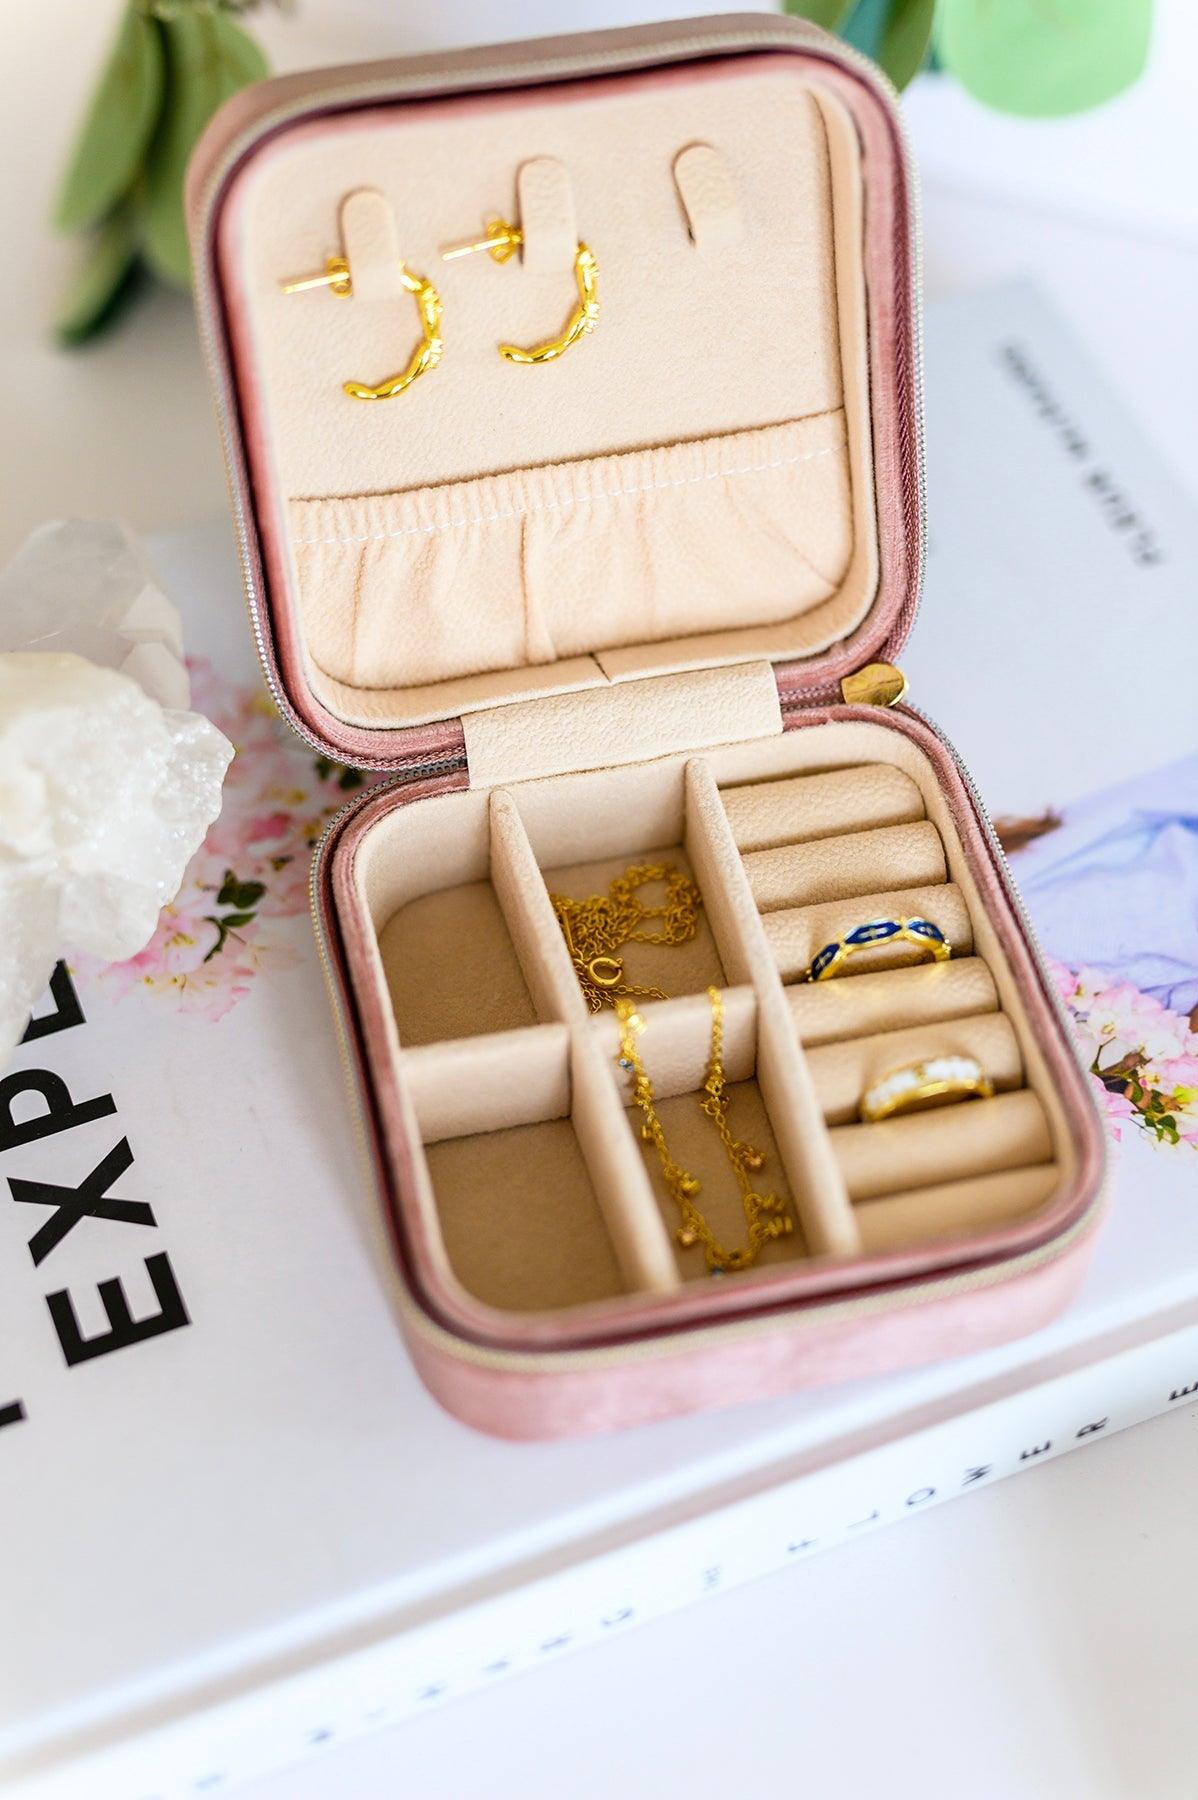 Kept and Carried Velvet Jewlery Box in Mauve - The Fiery Jasmine